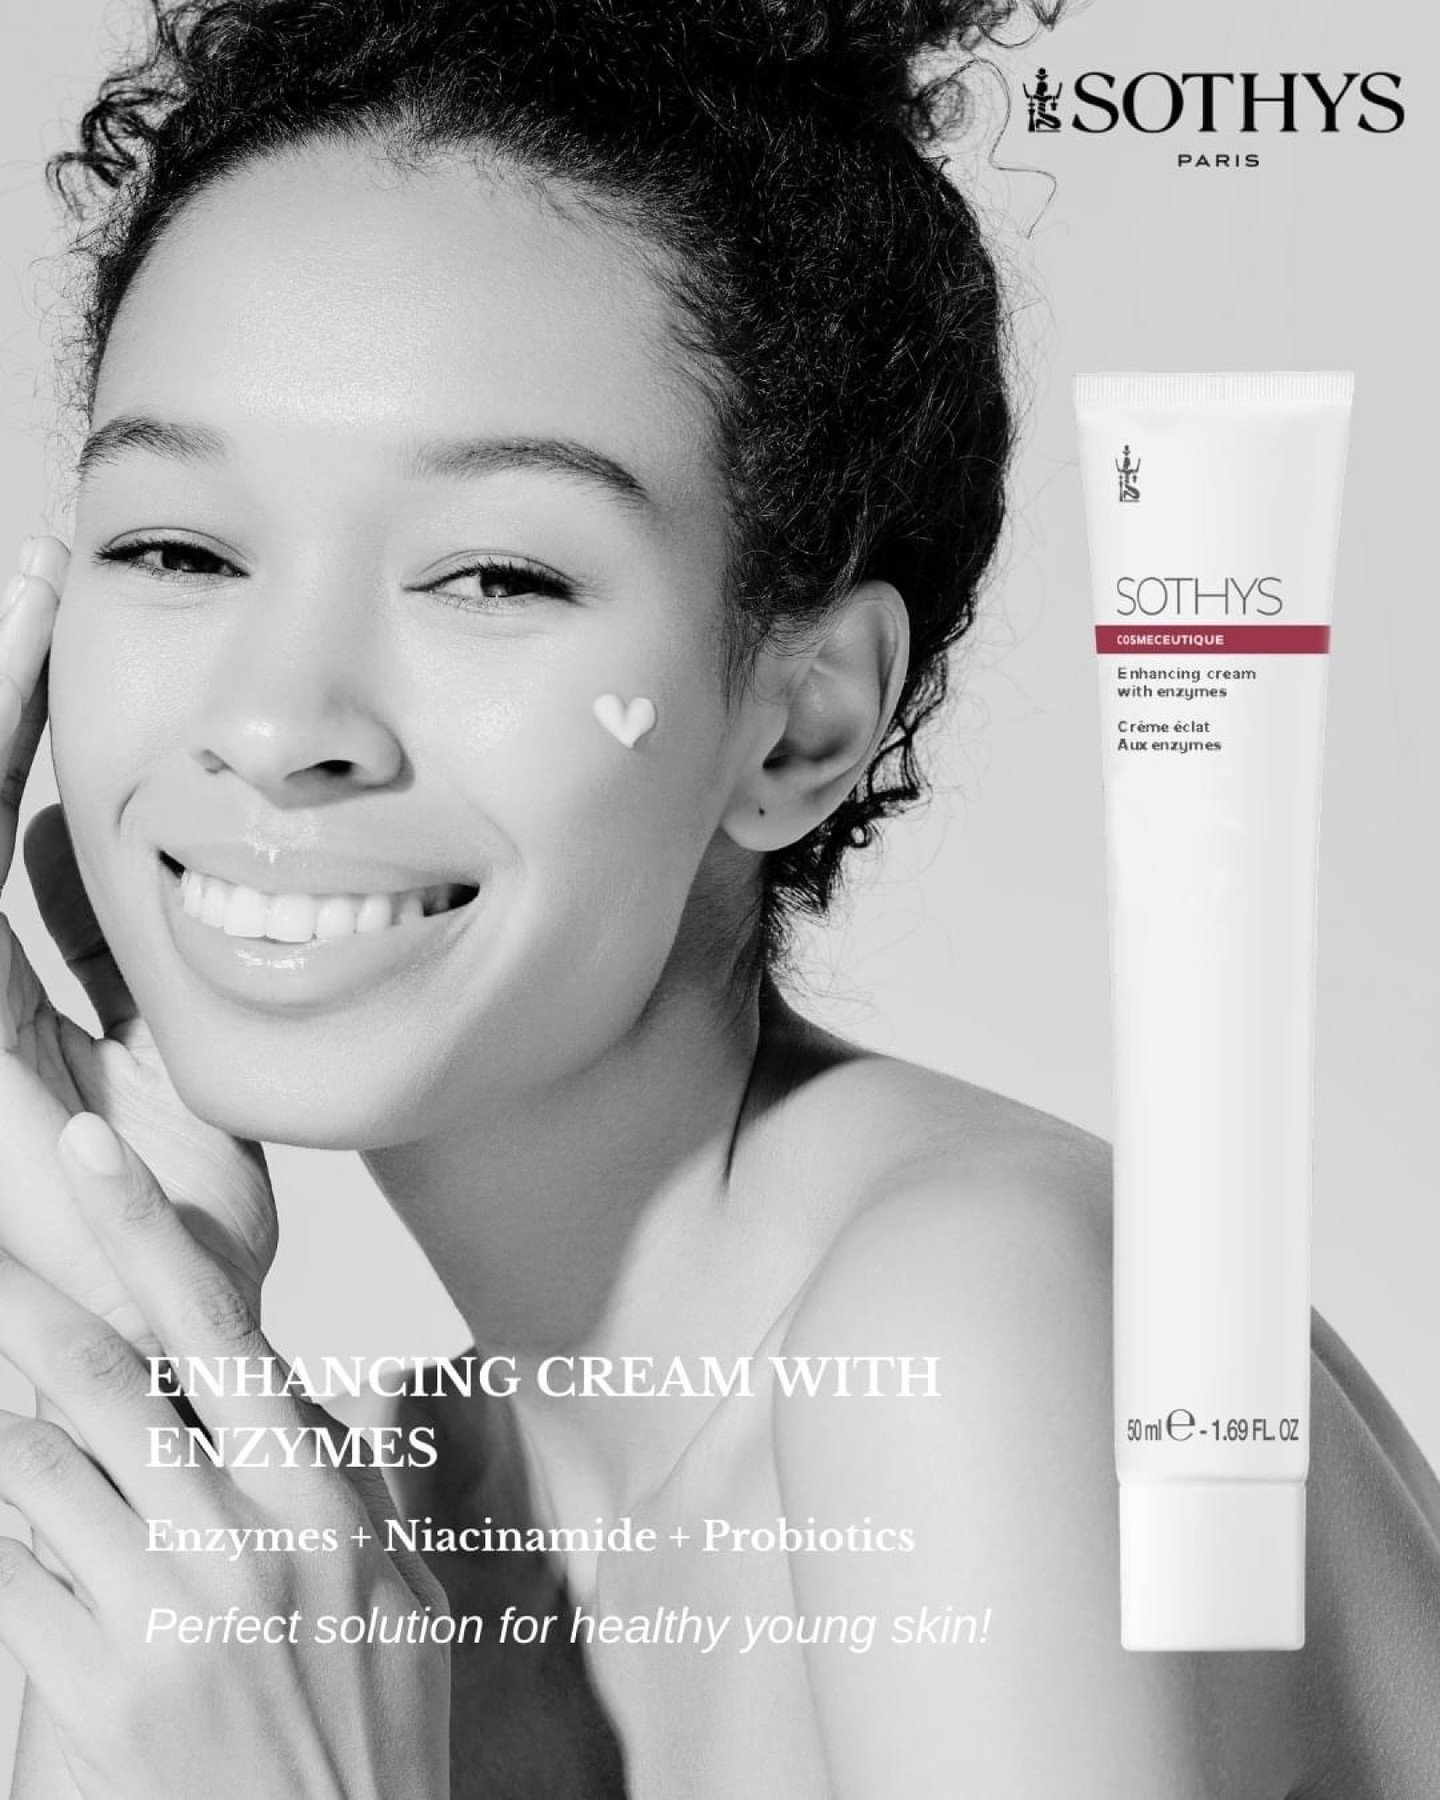 ENHANCING CREAM WITH ENZYMES
This multi-active cream formulation can be used for all skin types as either a day cream on its own, or at night combined with any of the SOTHYS Dermoboosters to support individual skin issues as recommended by your SOTHY